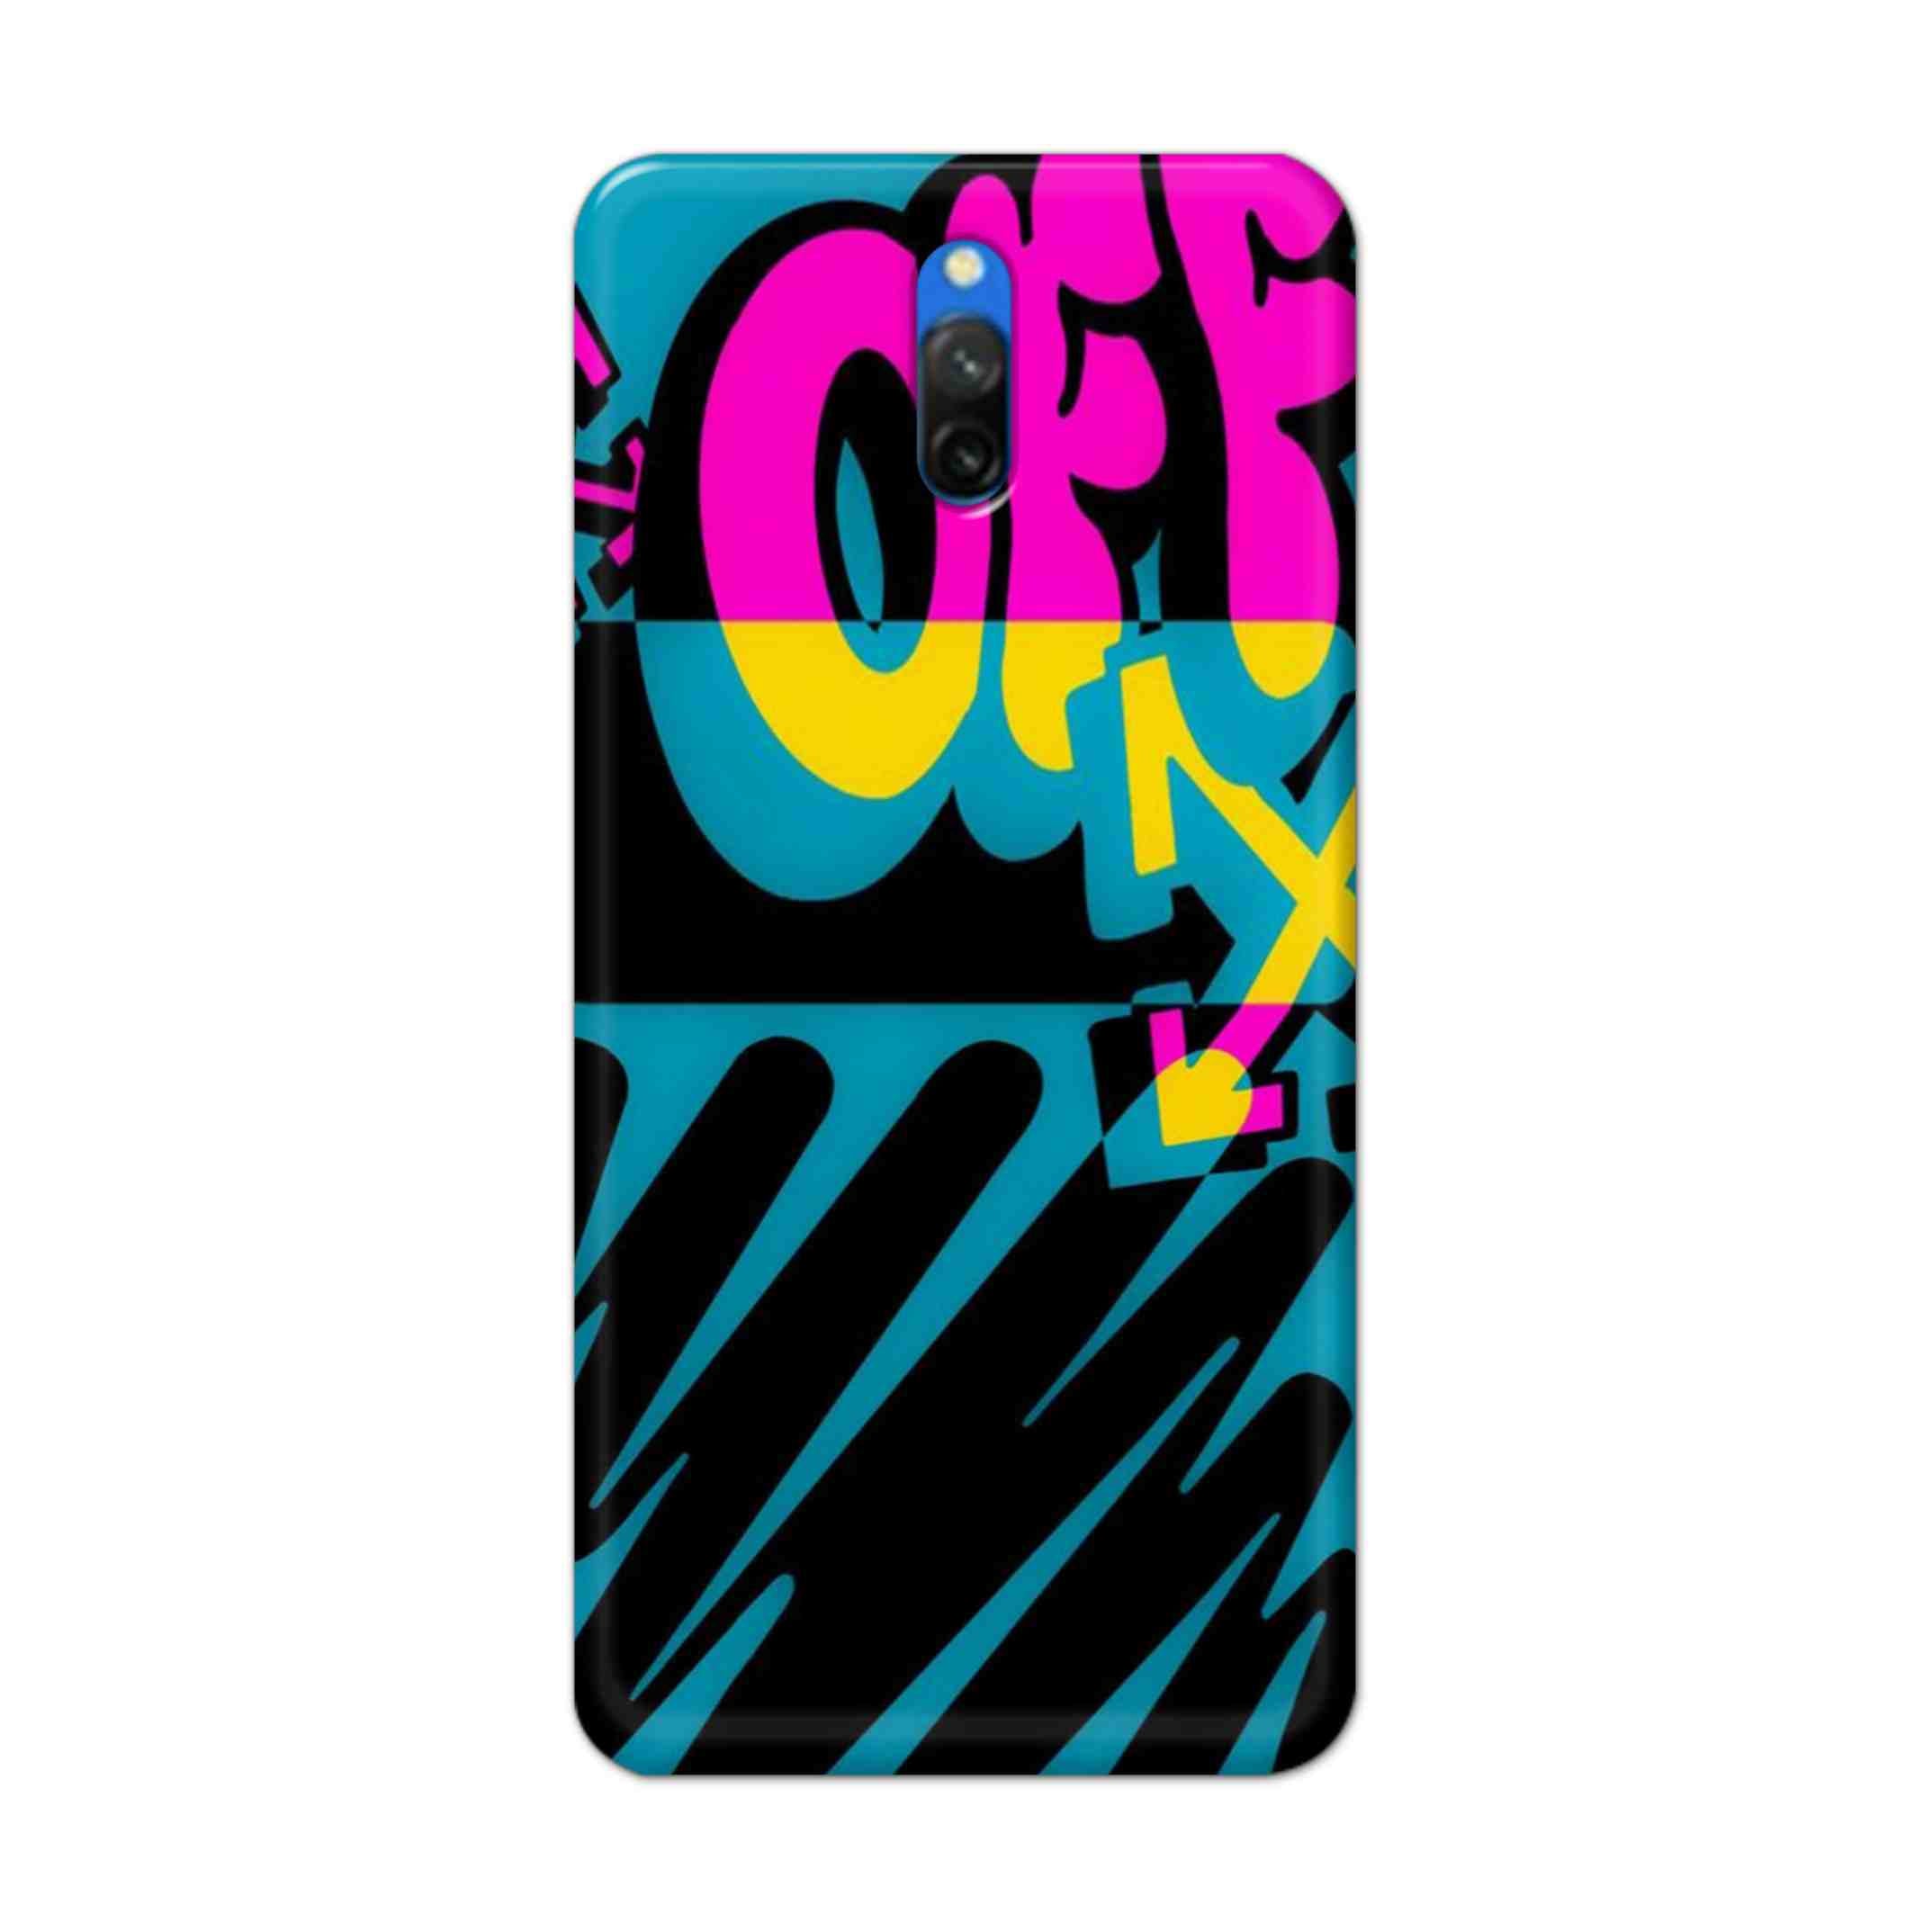 Buy Off Hard Back Mobile Phone Case/Cover For Redmi 8A Dual Online